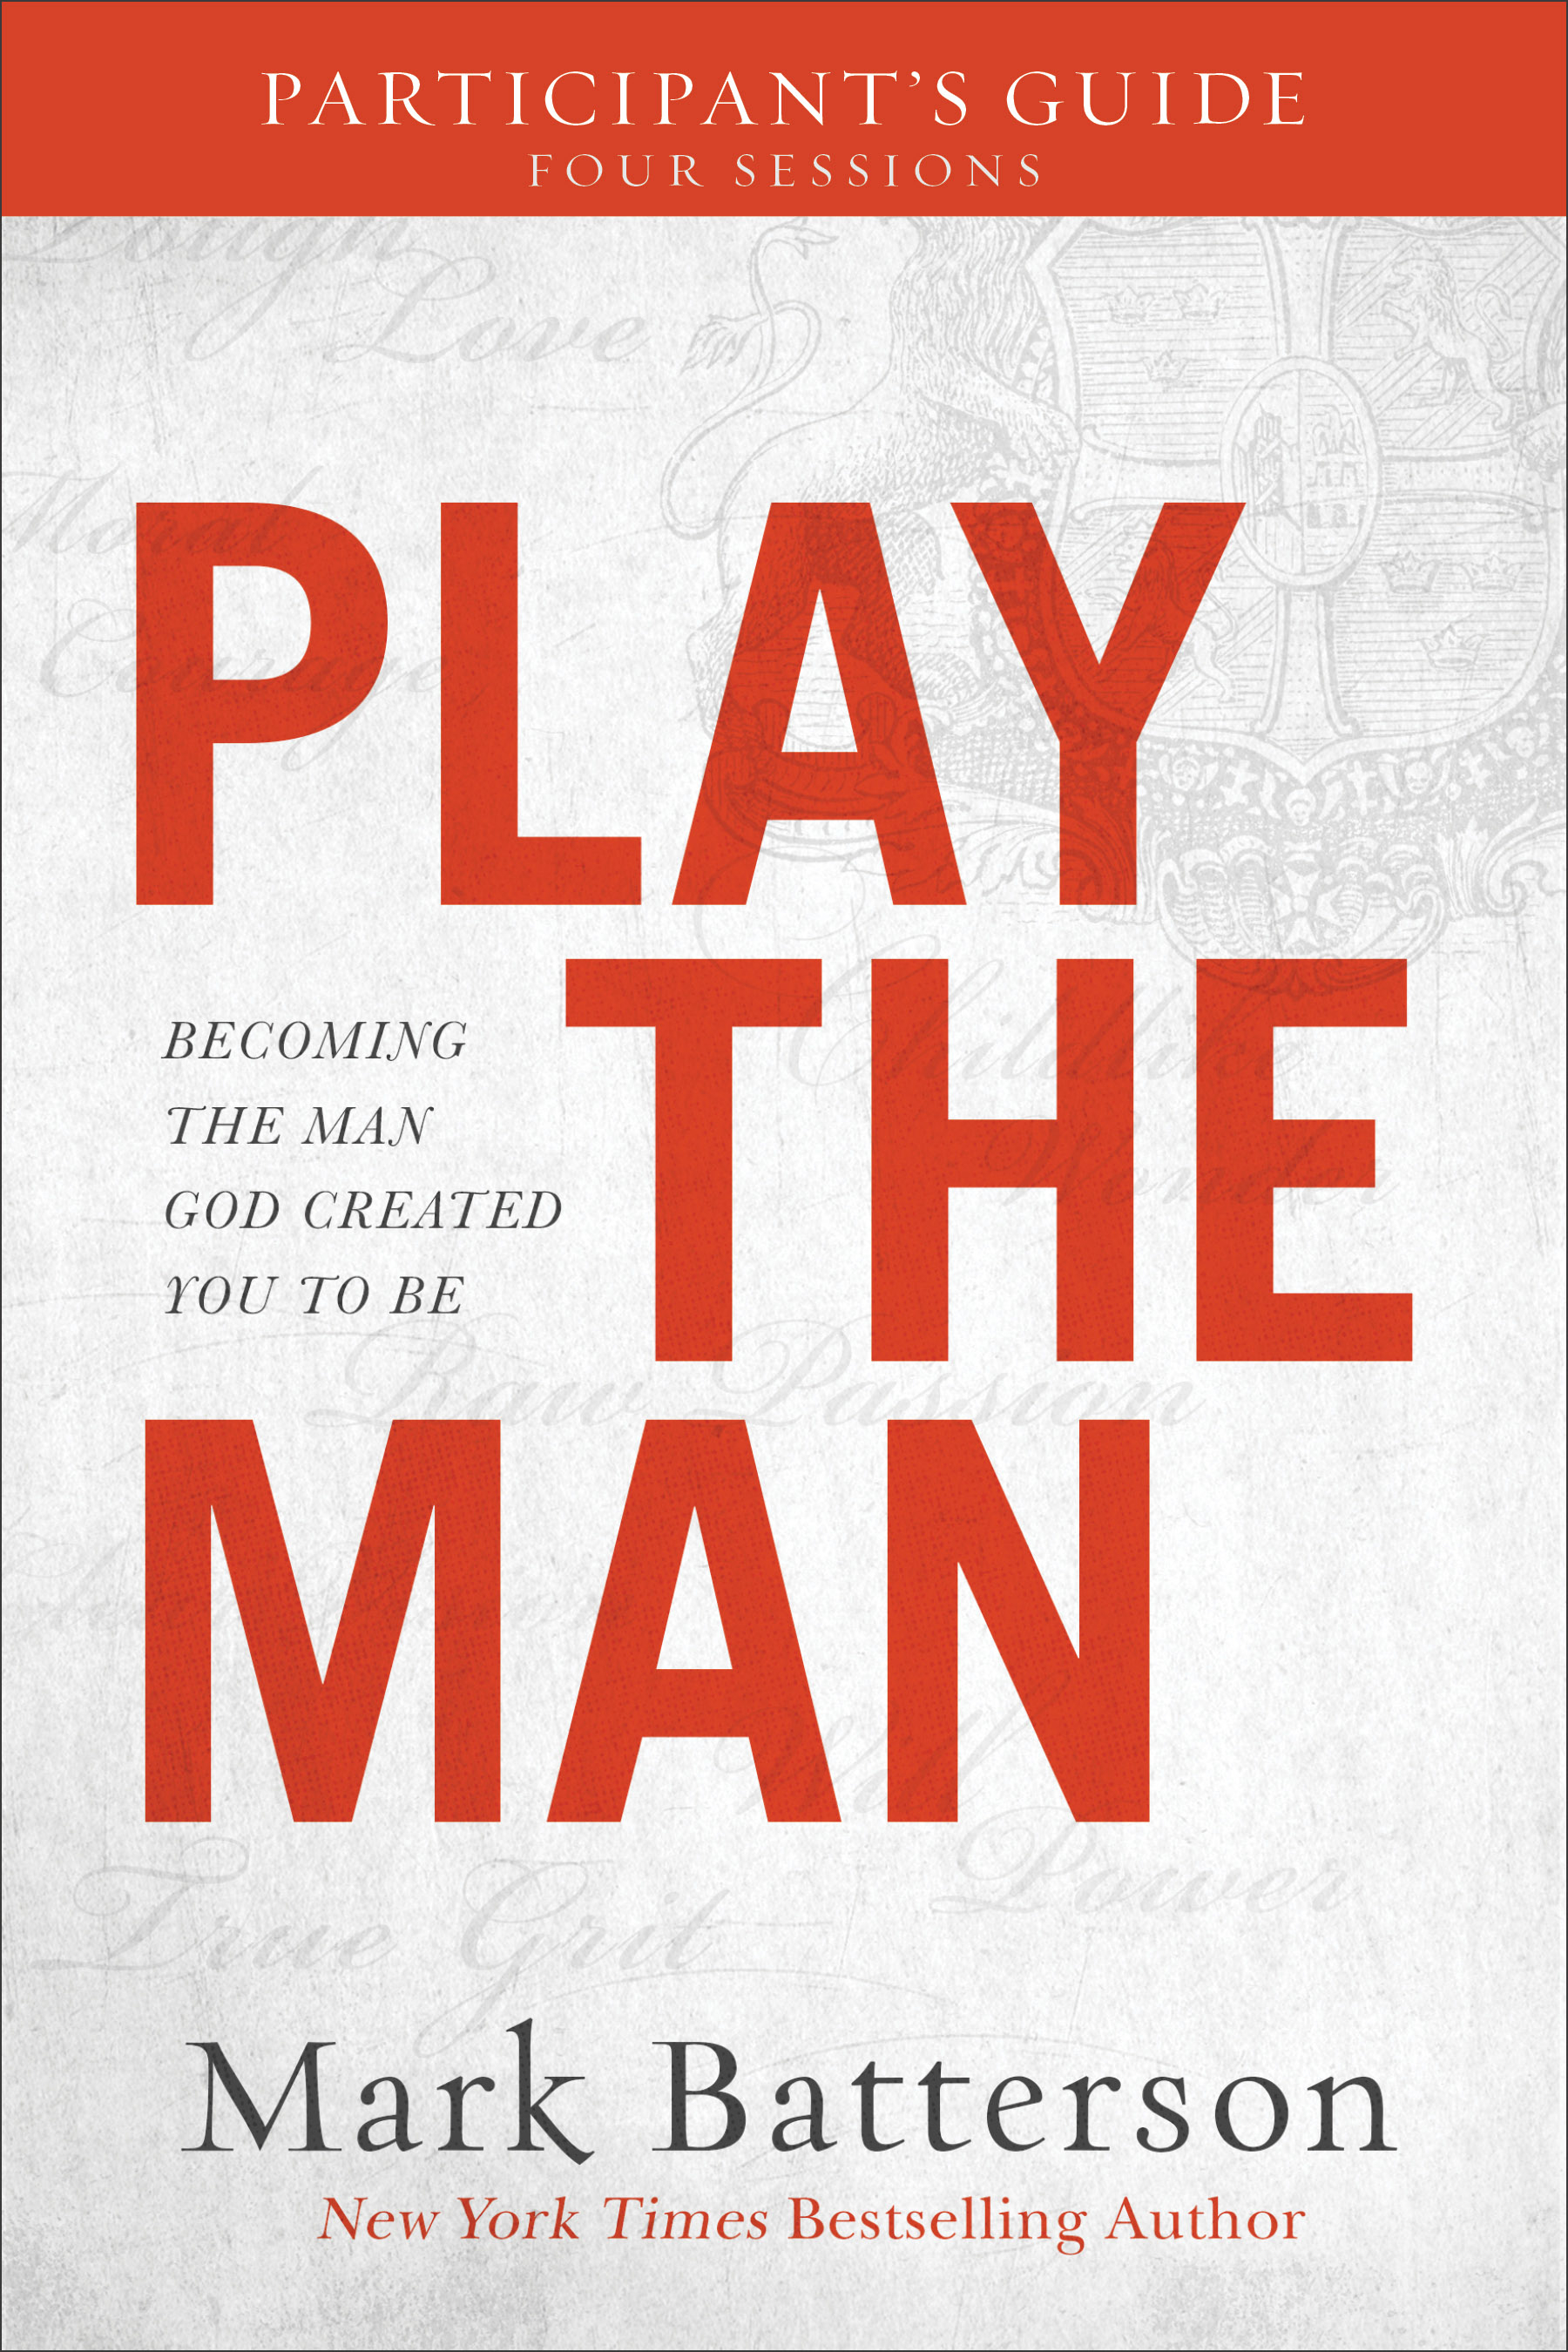 Play the Man Participant's Guide